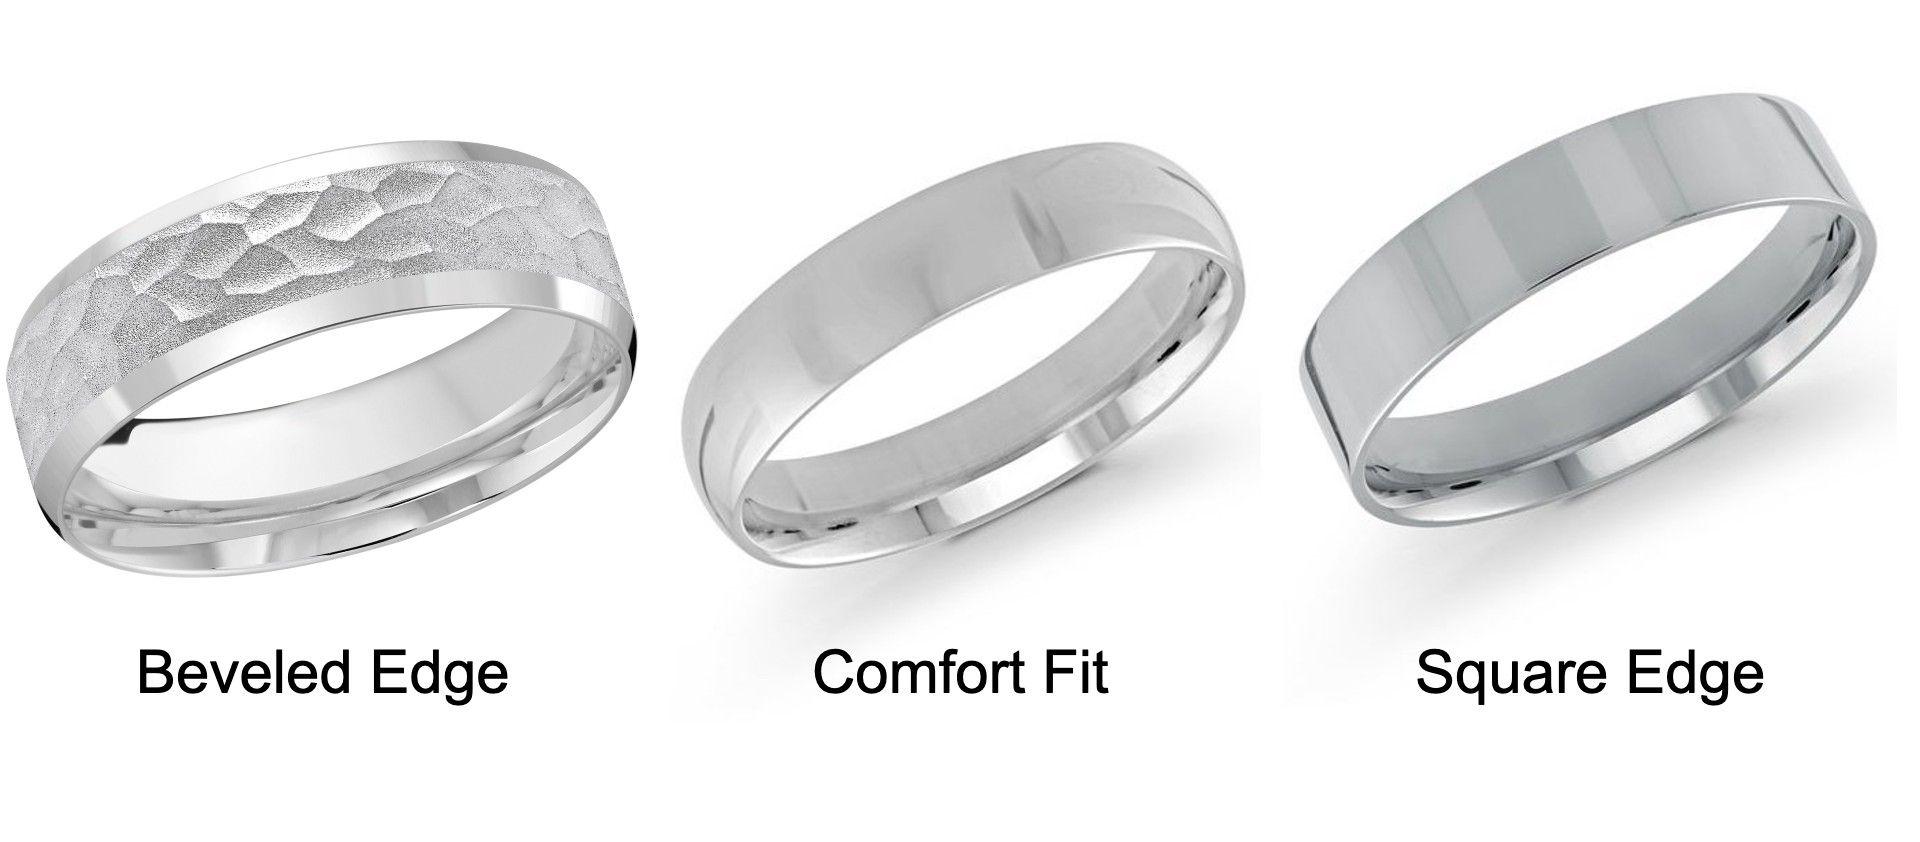 beveled edge wedding ring compared to other wedding rings